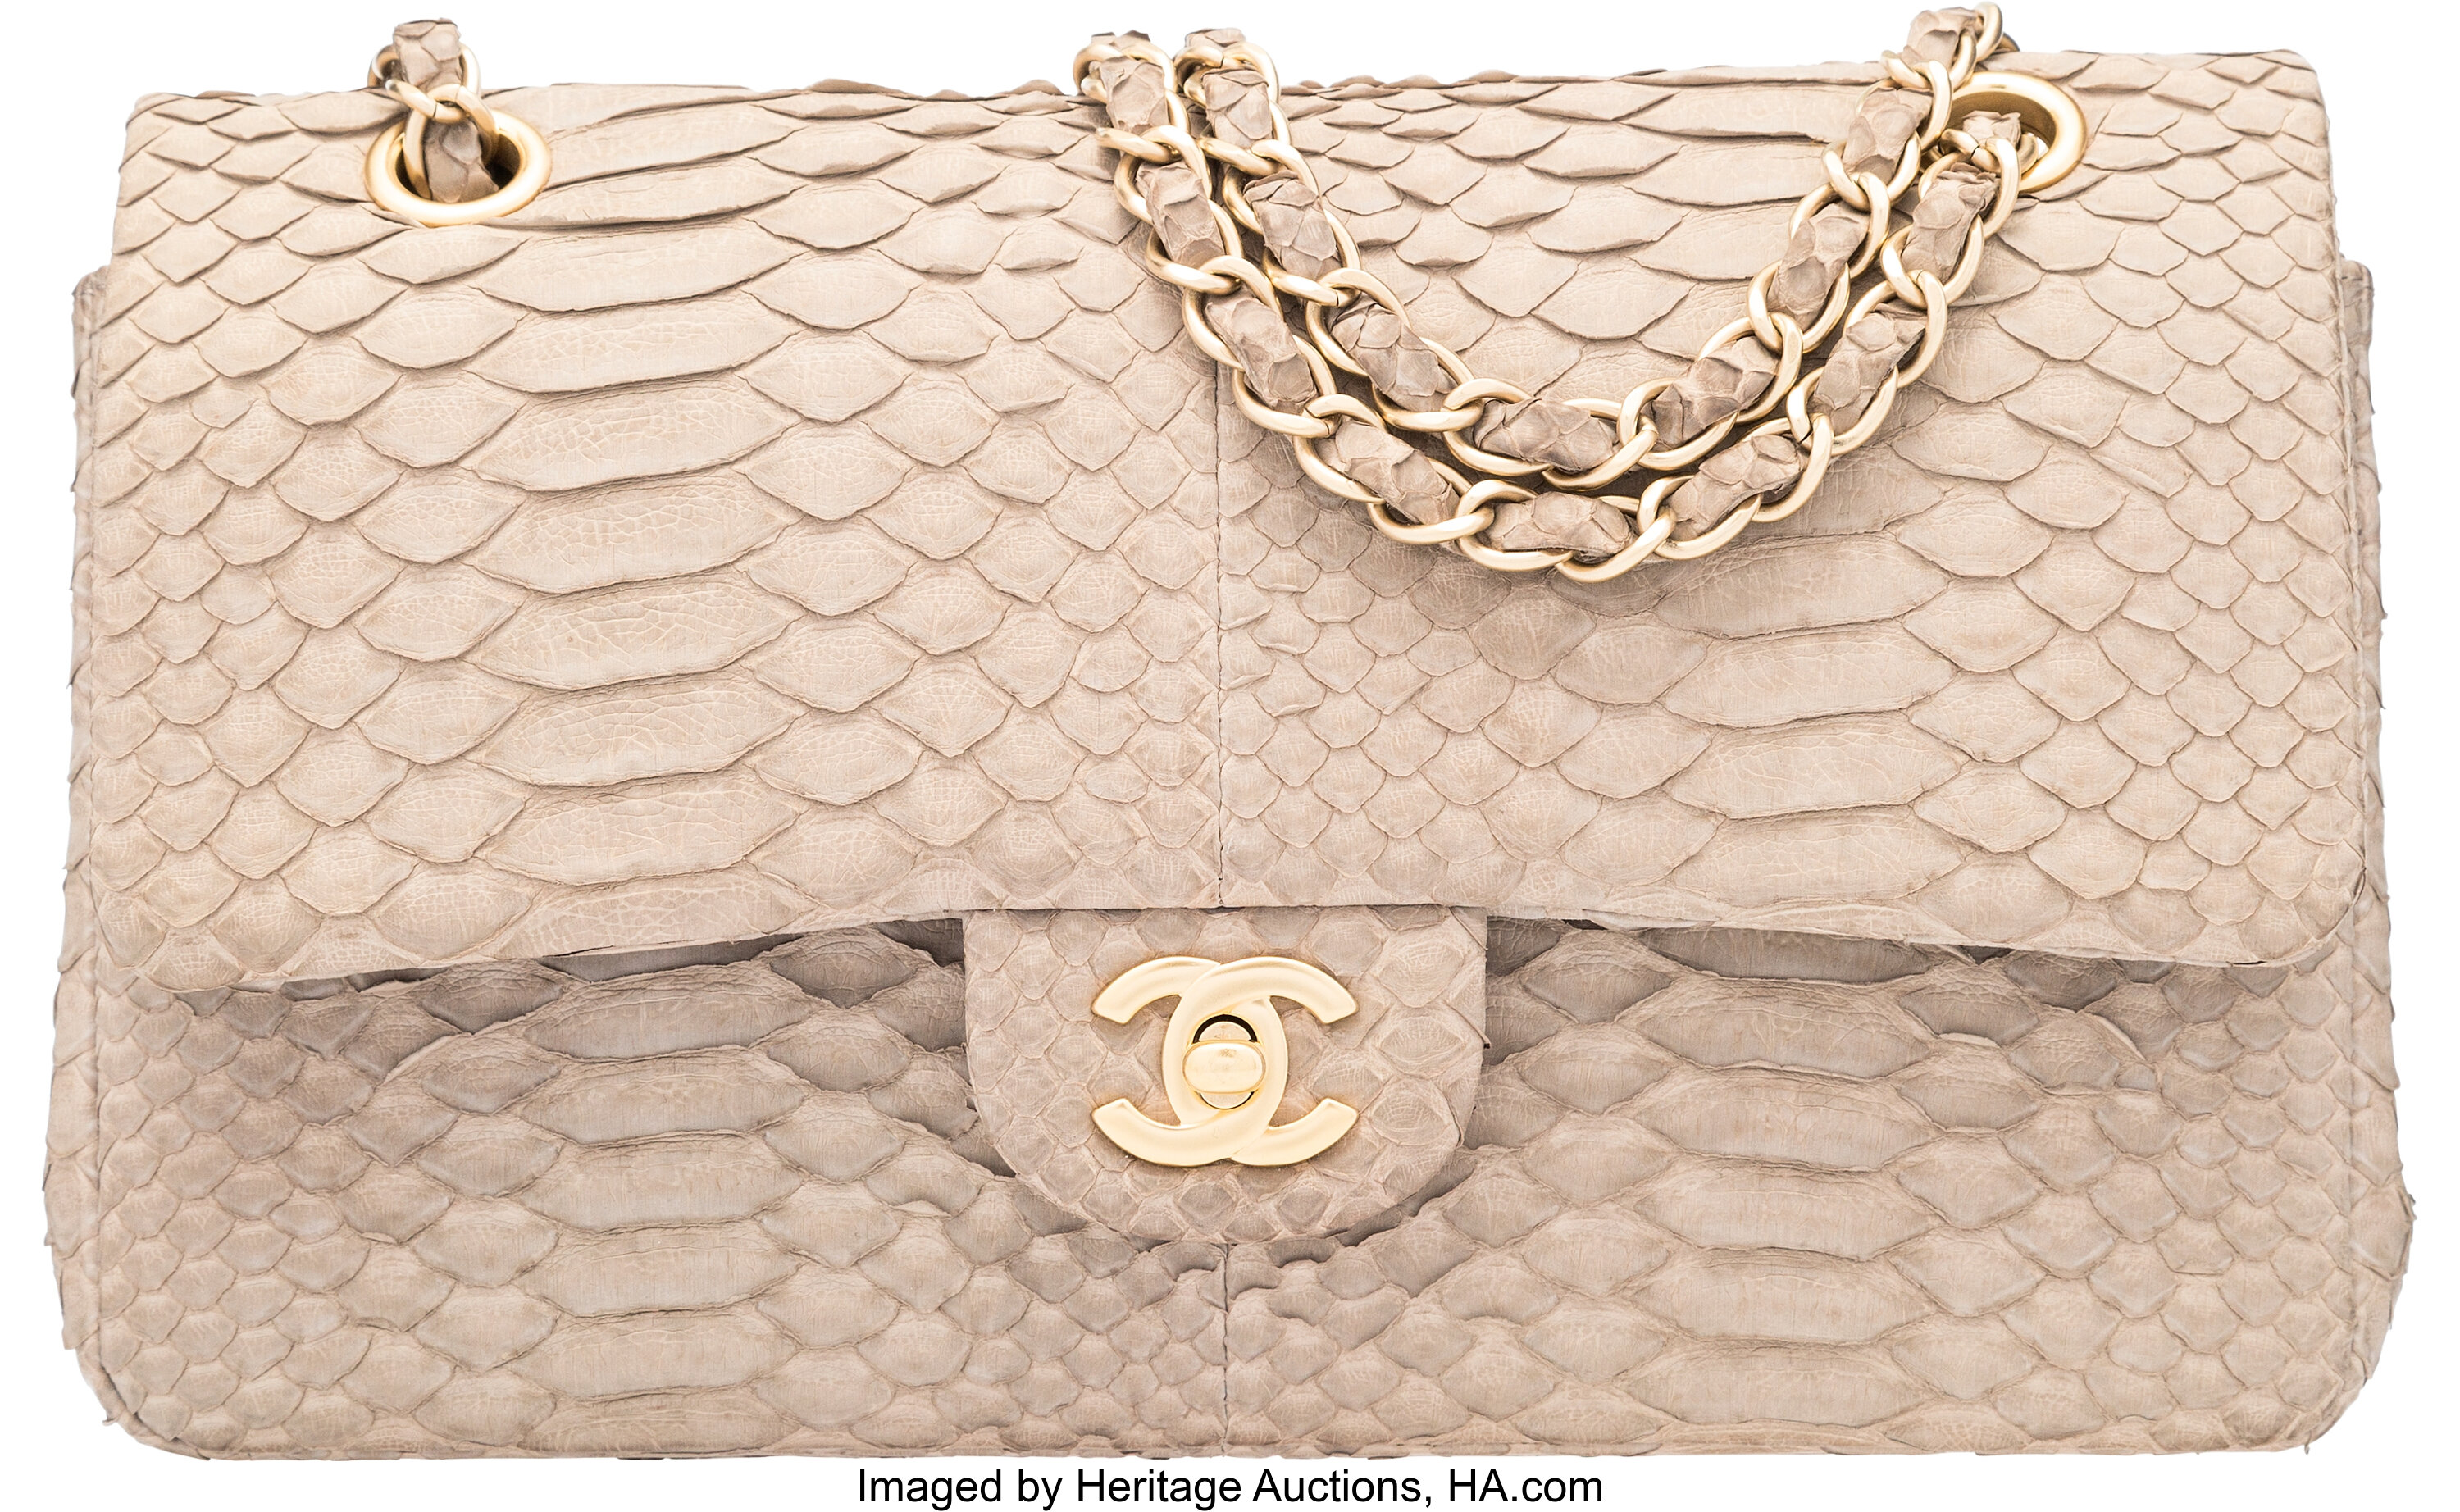 Chanel Beige Python Medium Double Flap Bag with Gold Hardware